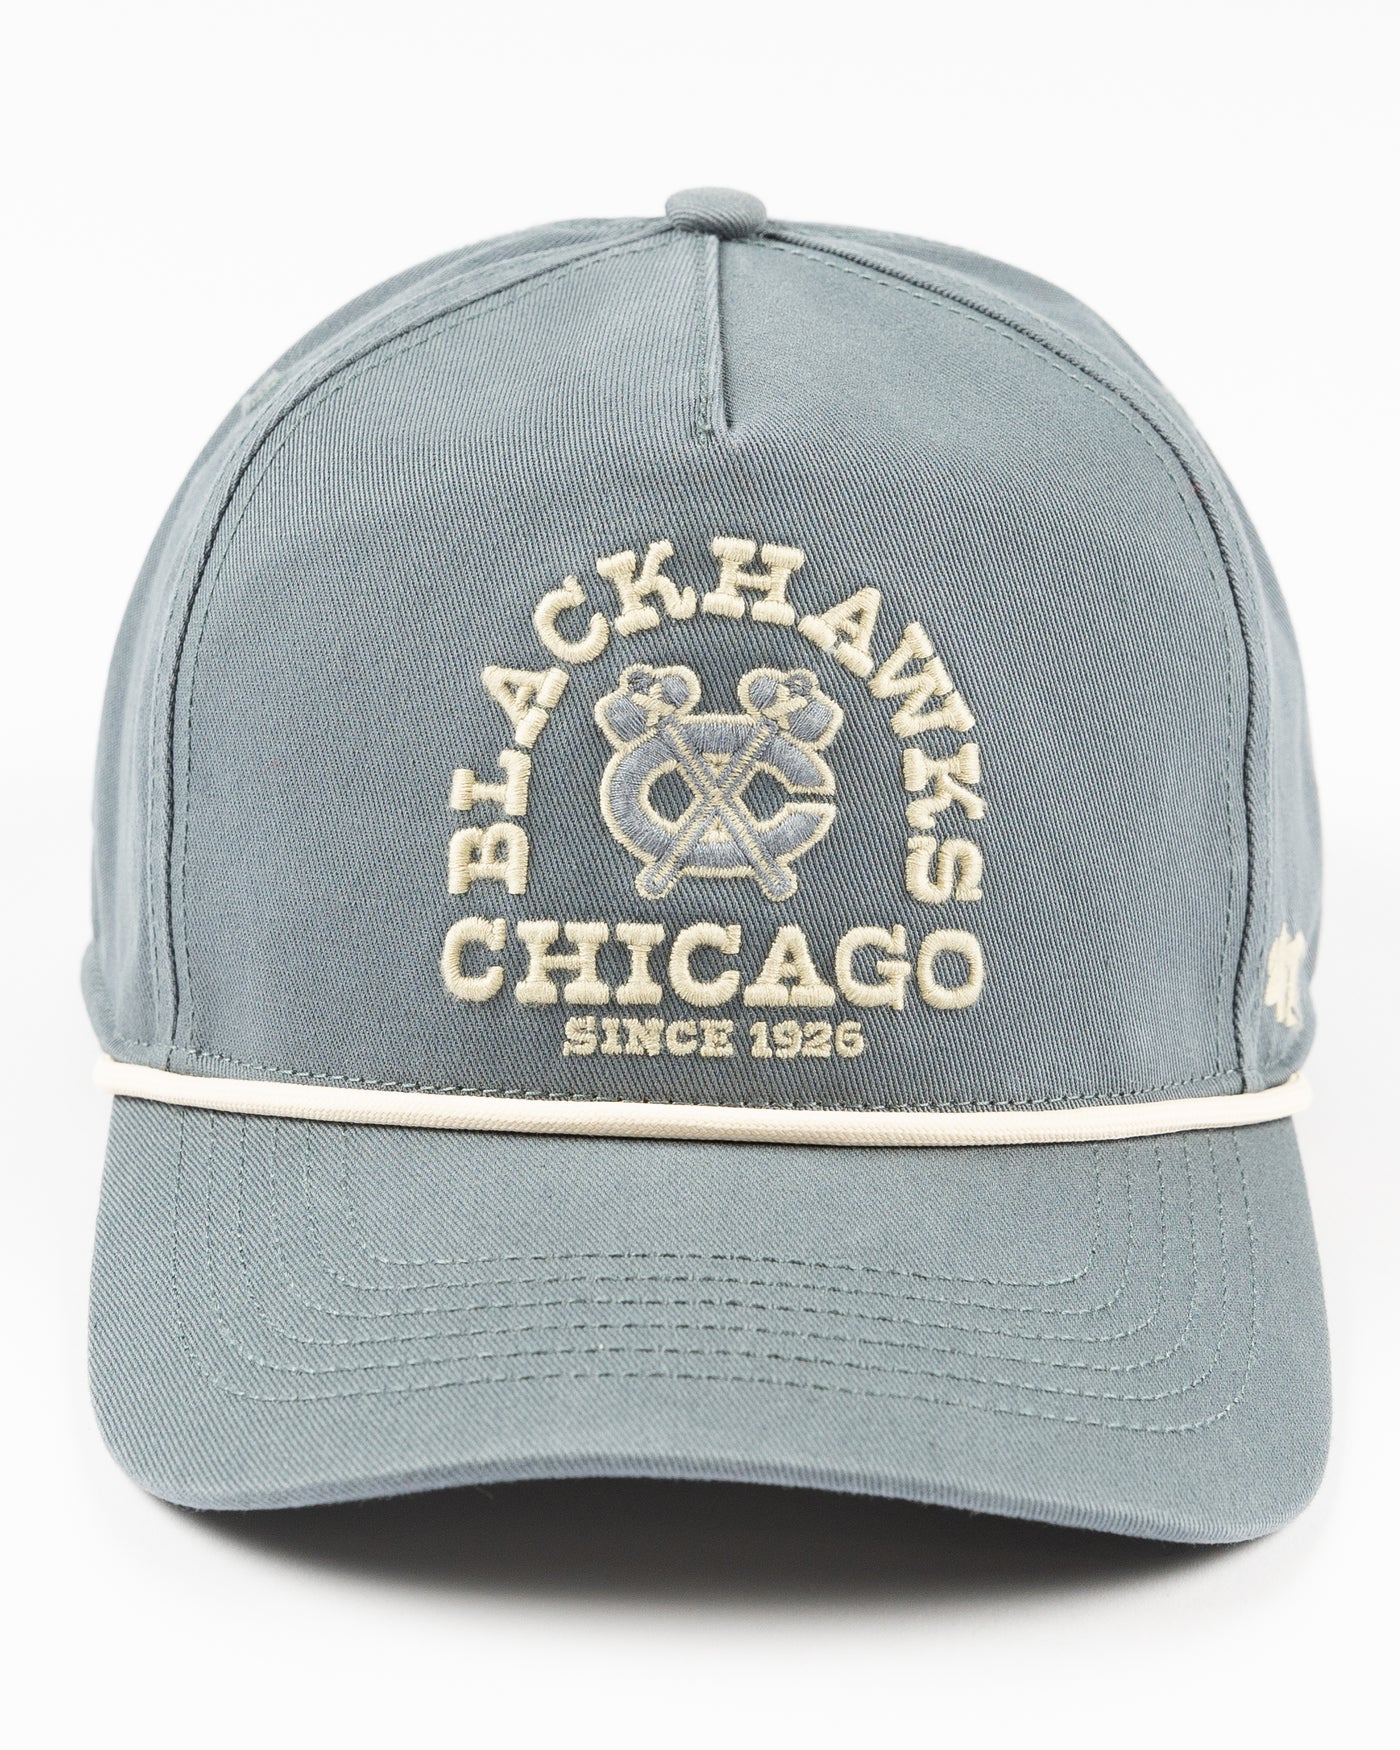 light blue '47 brand rope hat with embroidered Chicago Blackhawks wordmark and secondary logo on front - front lay flat